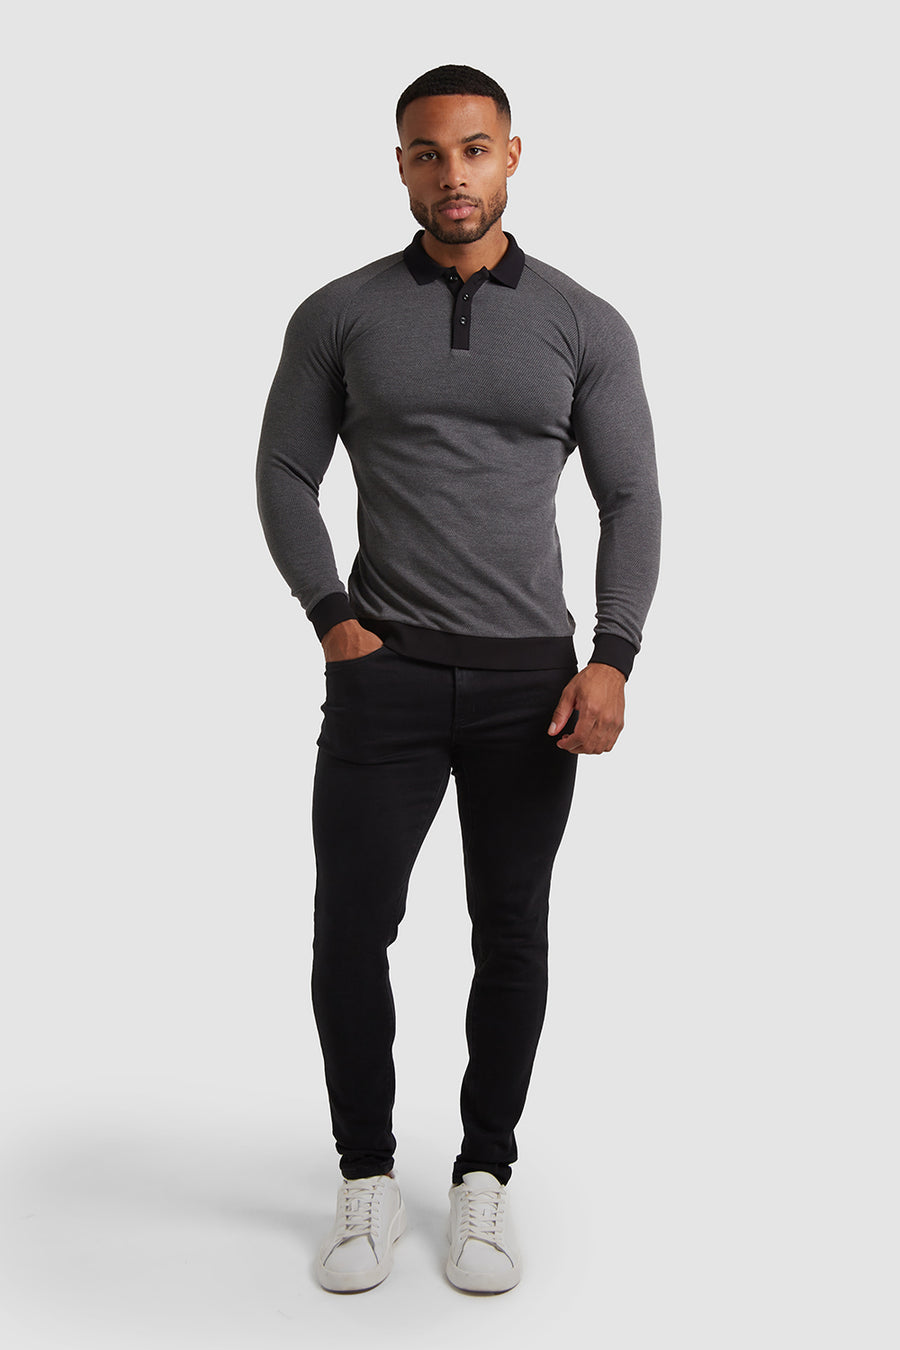 Knit Look Polo in Charcoal - TAILORED ATHLETE - USA